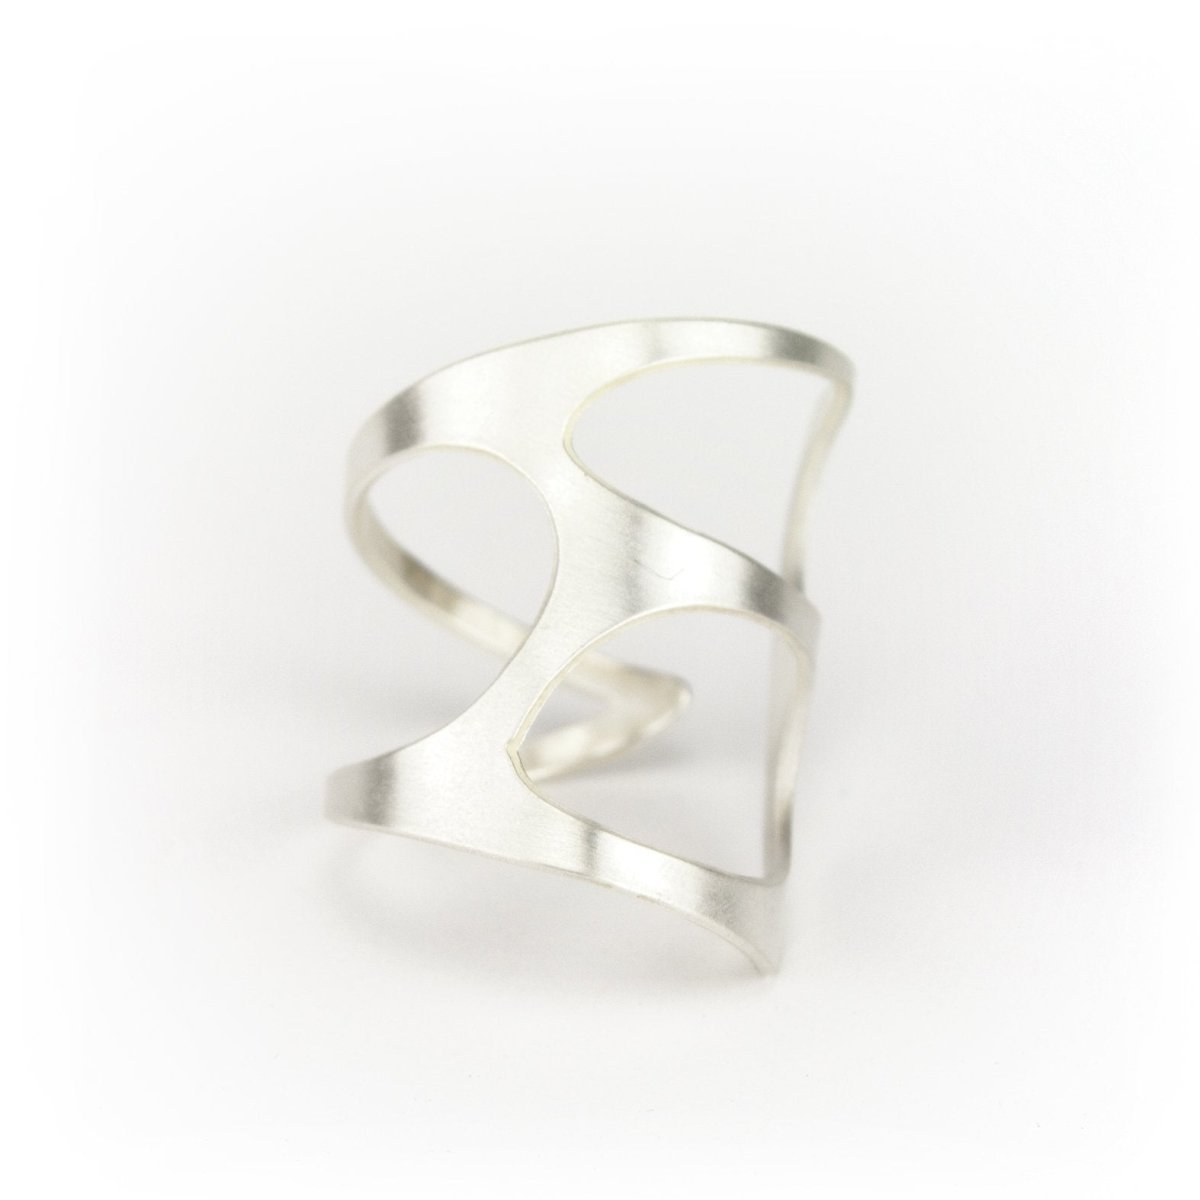 Organic Triangle ring in silver.